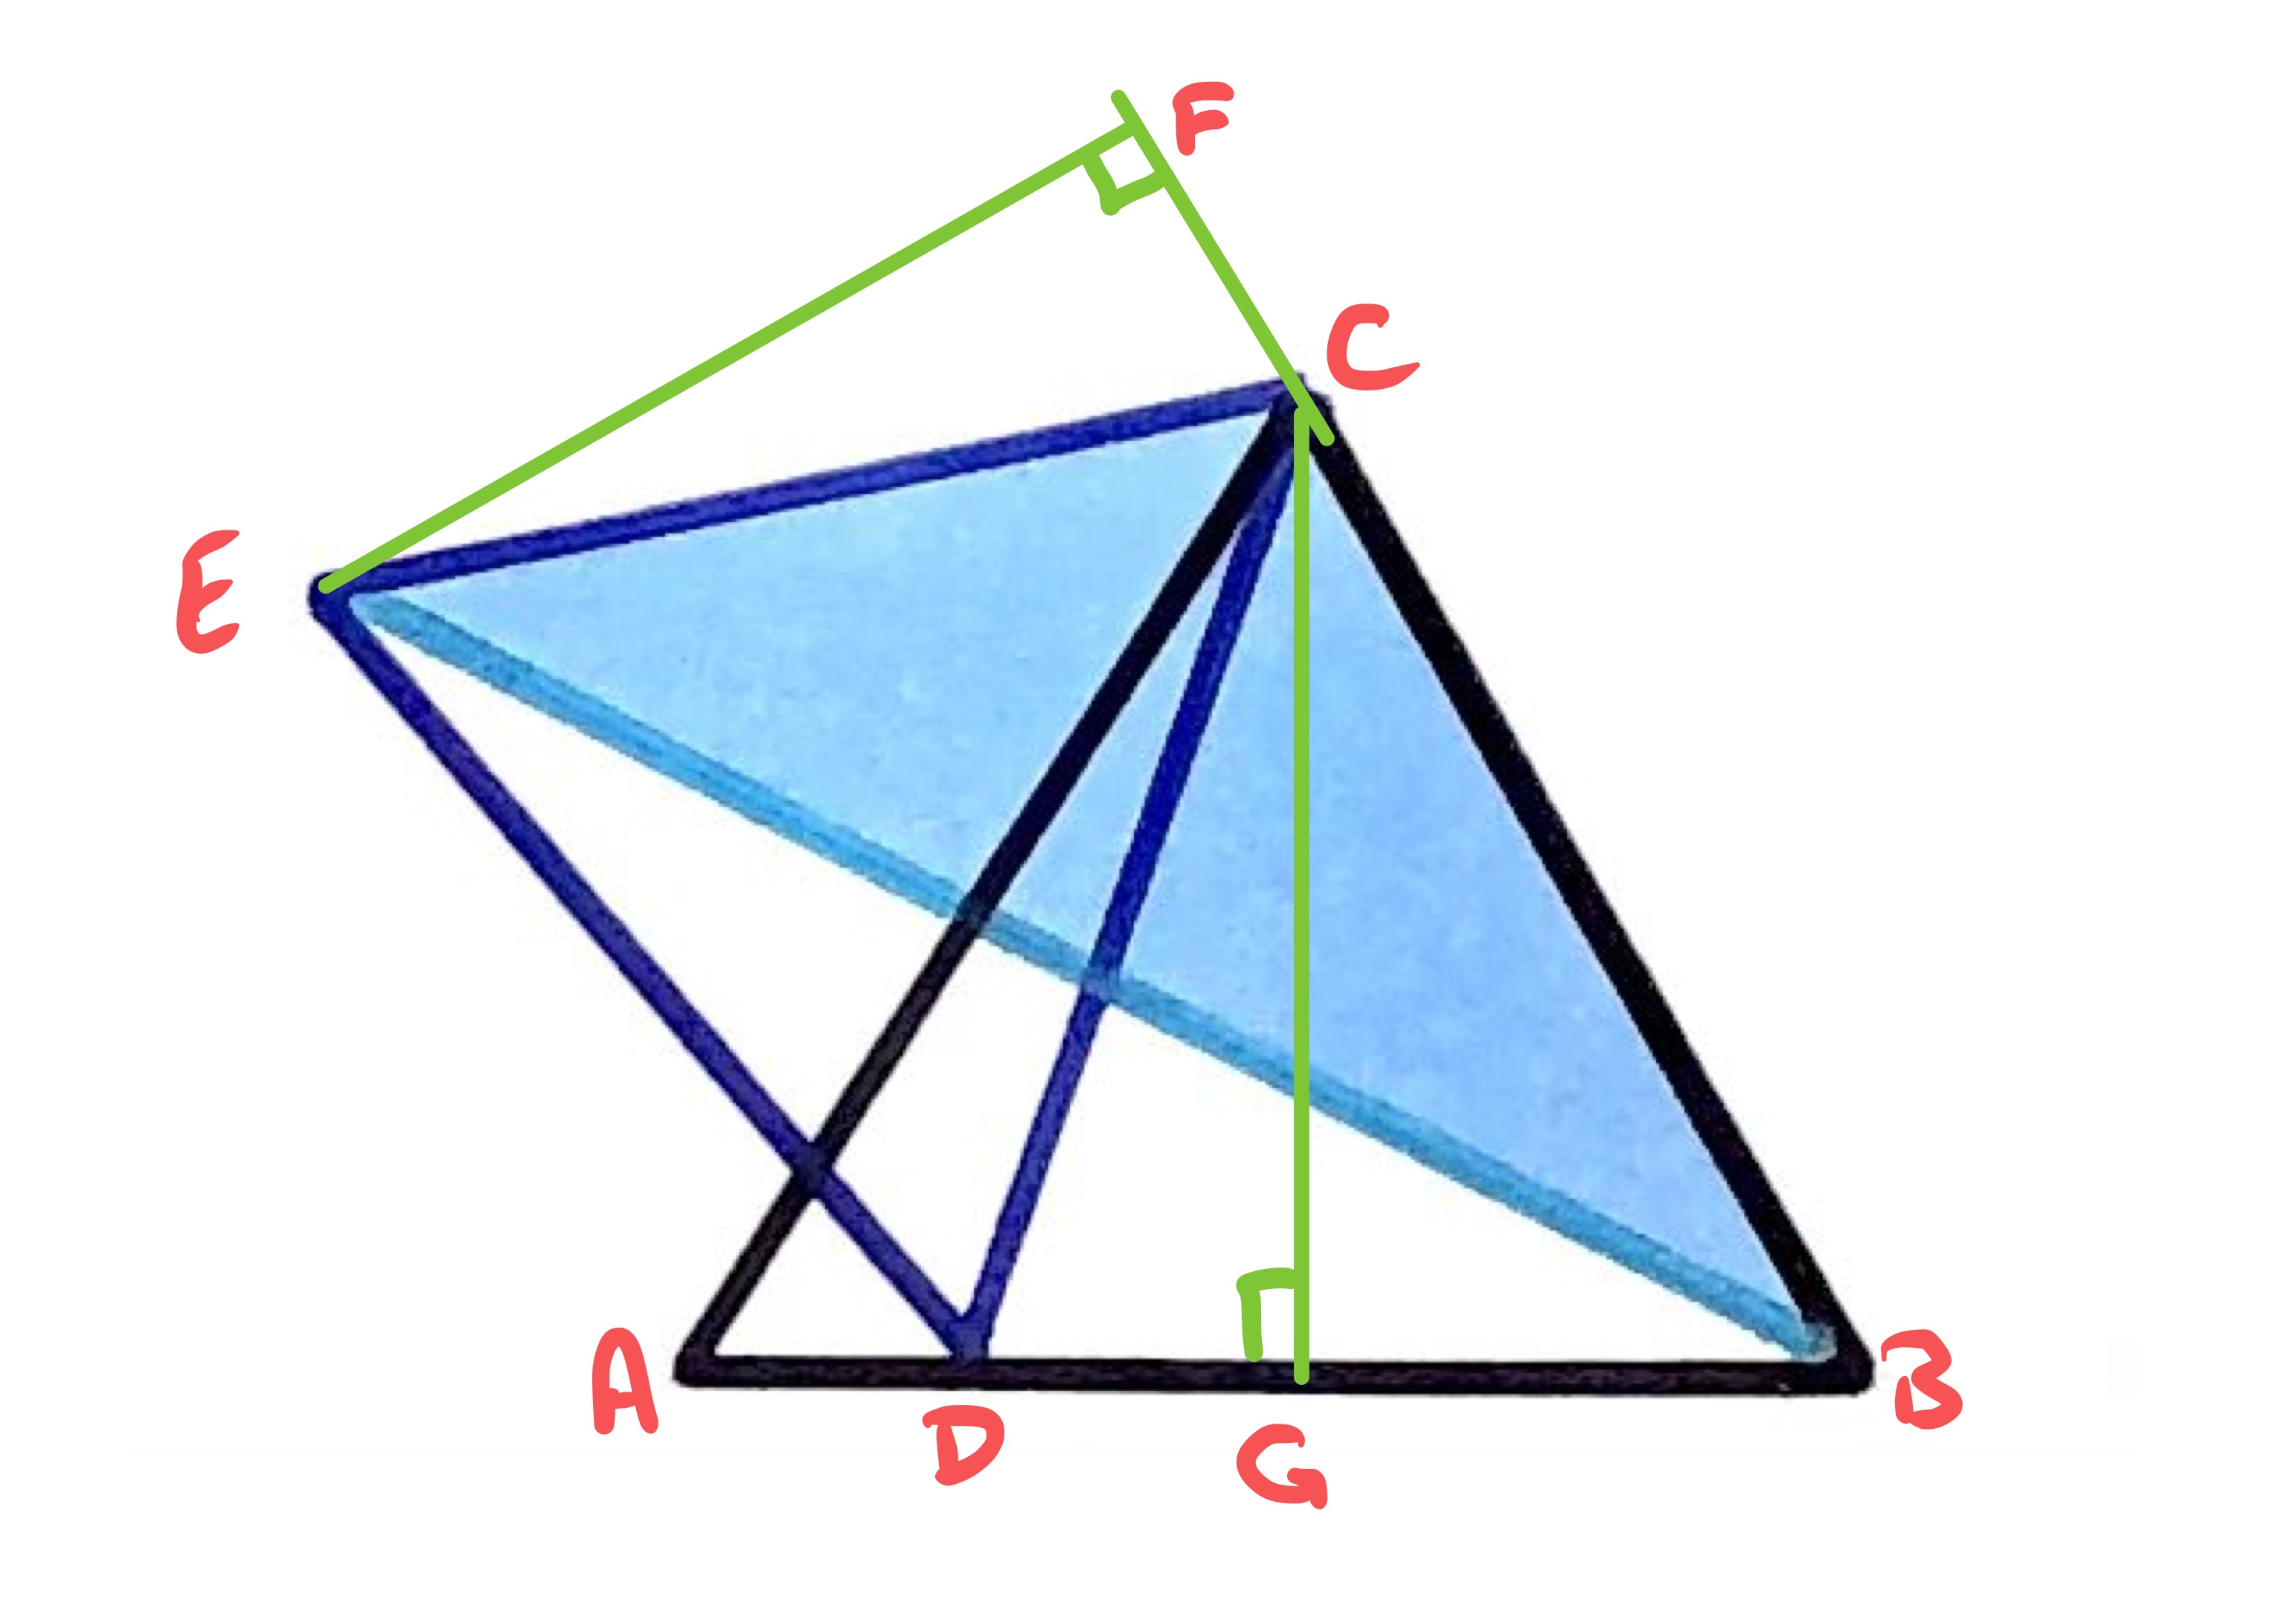 Two Overlapping Triangles II Labelled